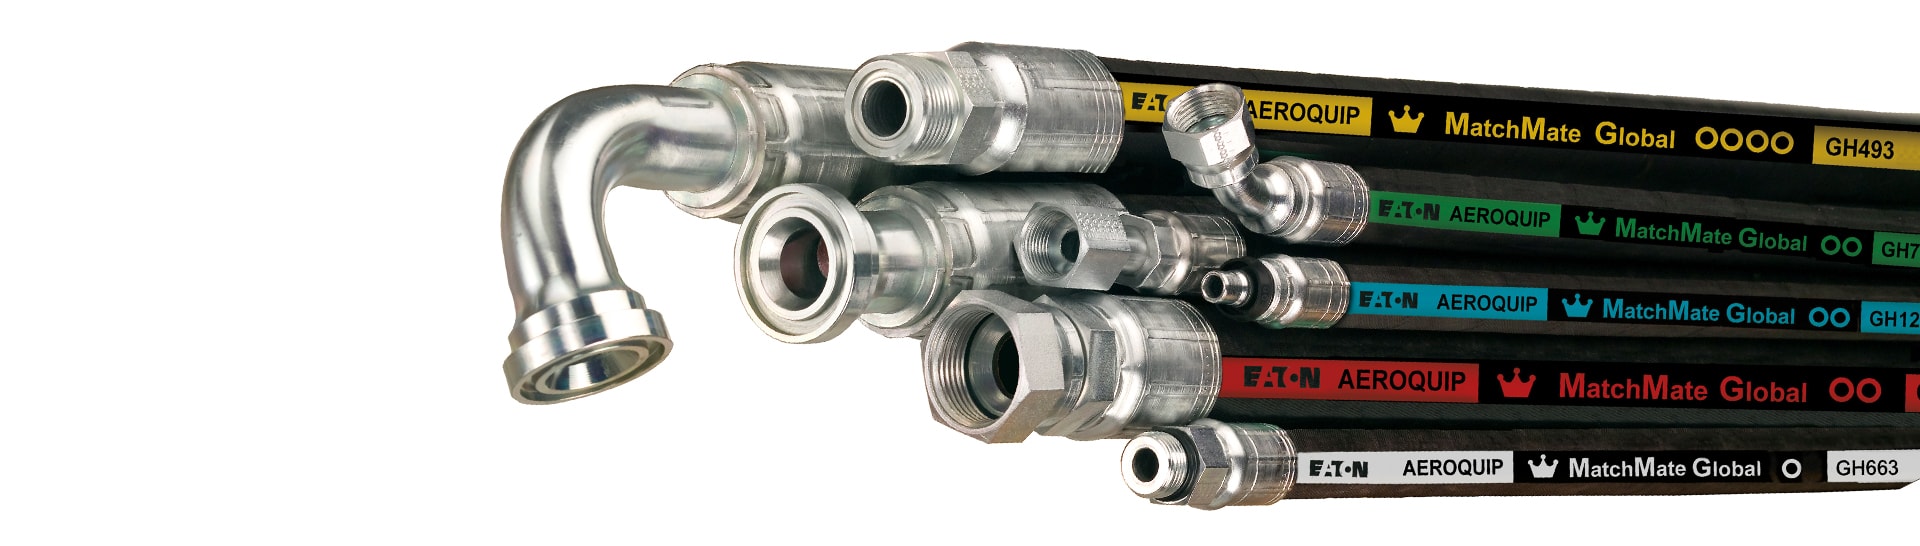 This is an image of Eaton Aeroquip hoses